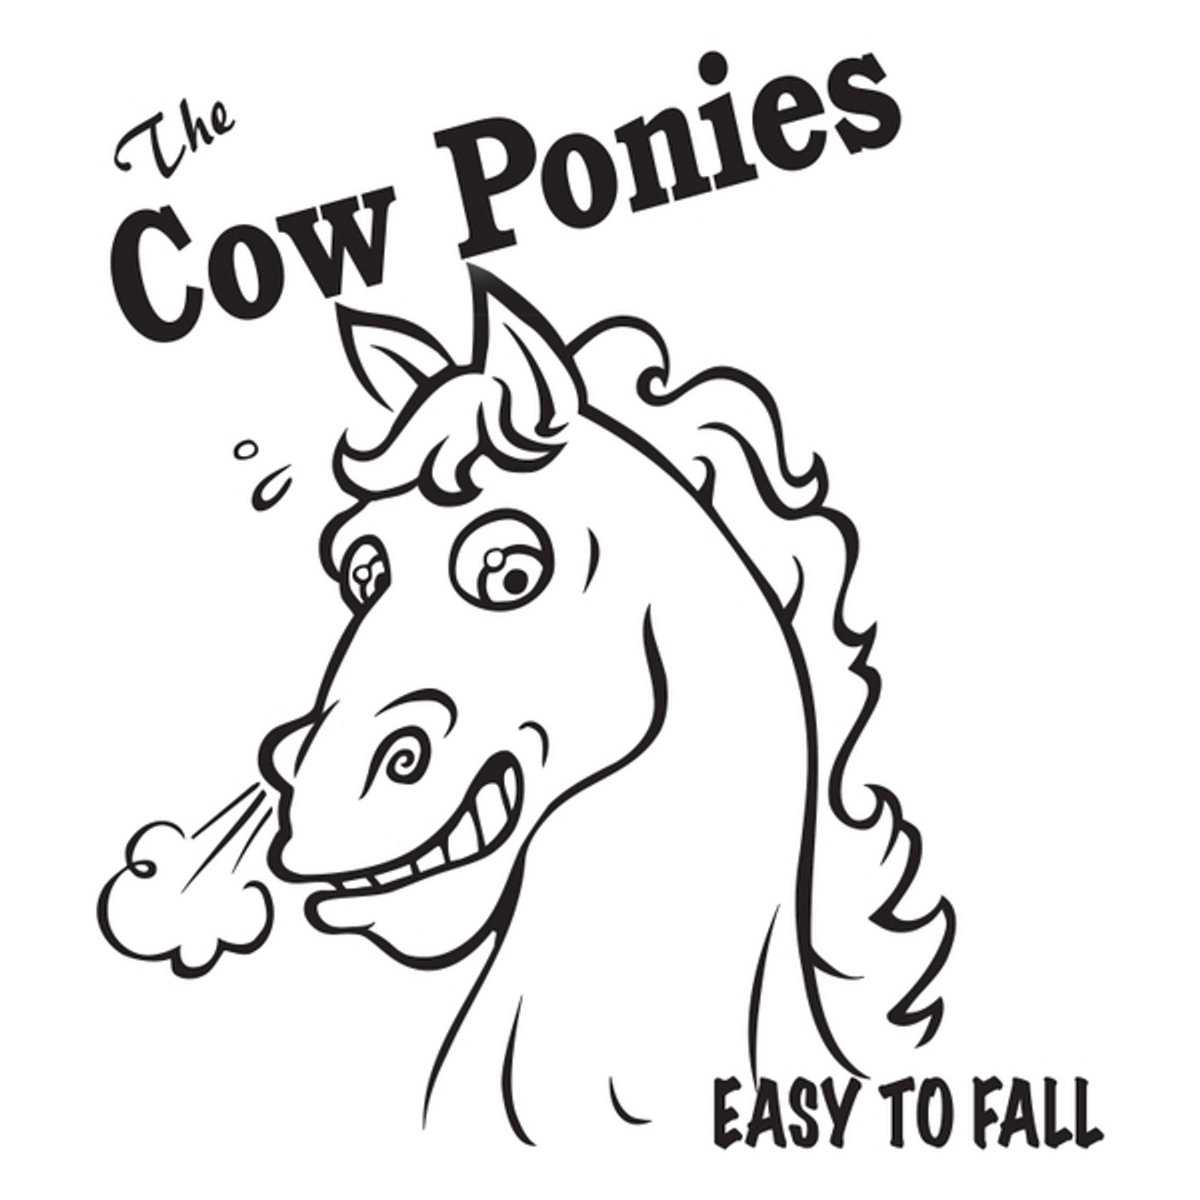 The Cow Ponies Easy To Fall illustration of horse snorting out nose